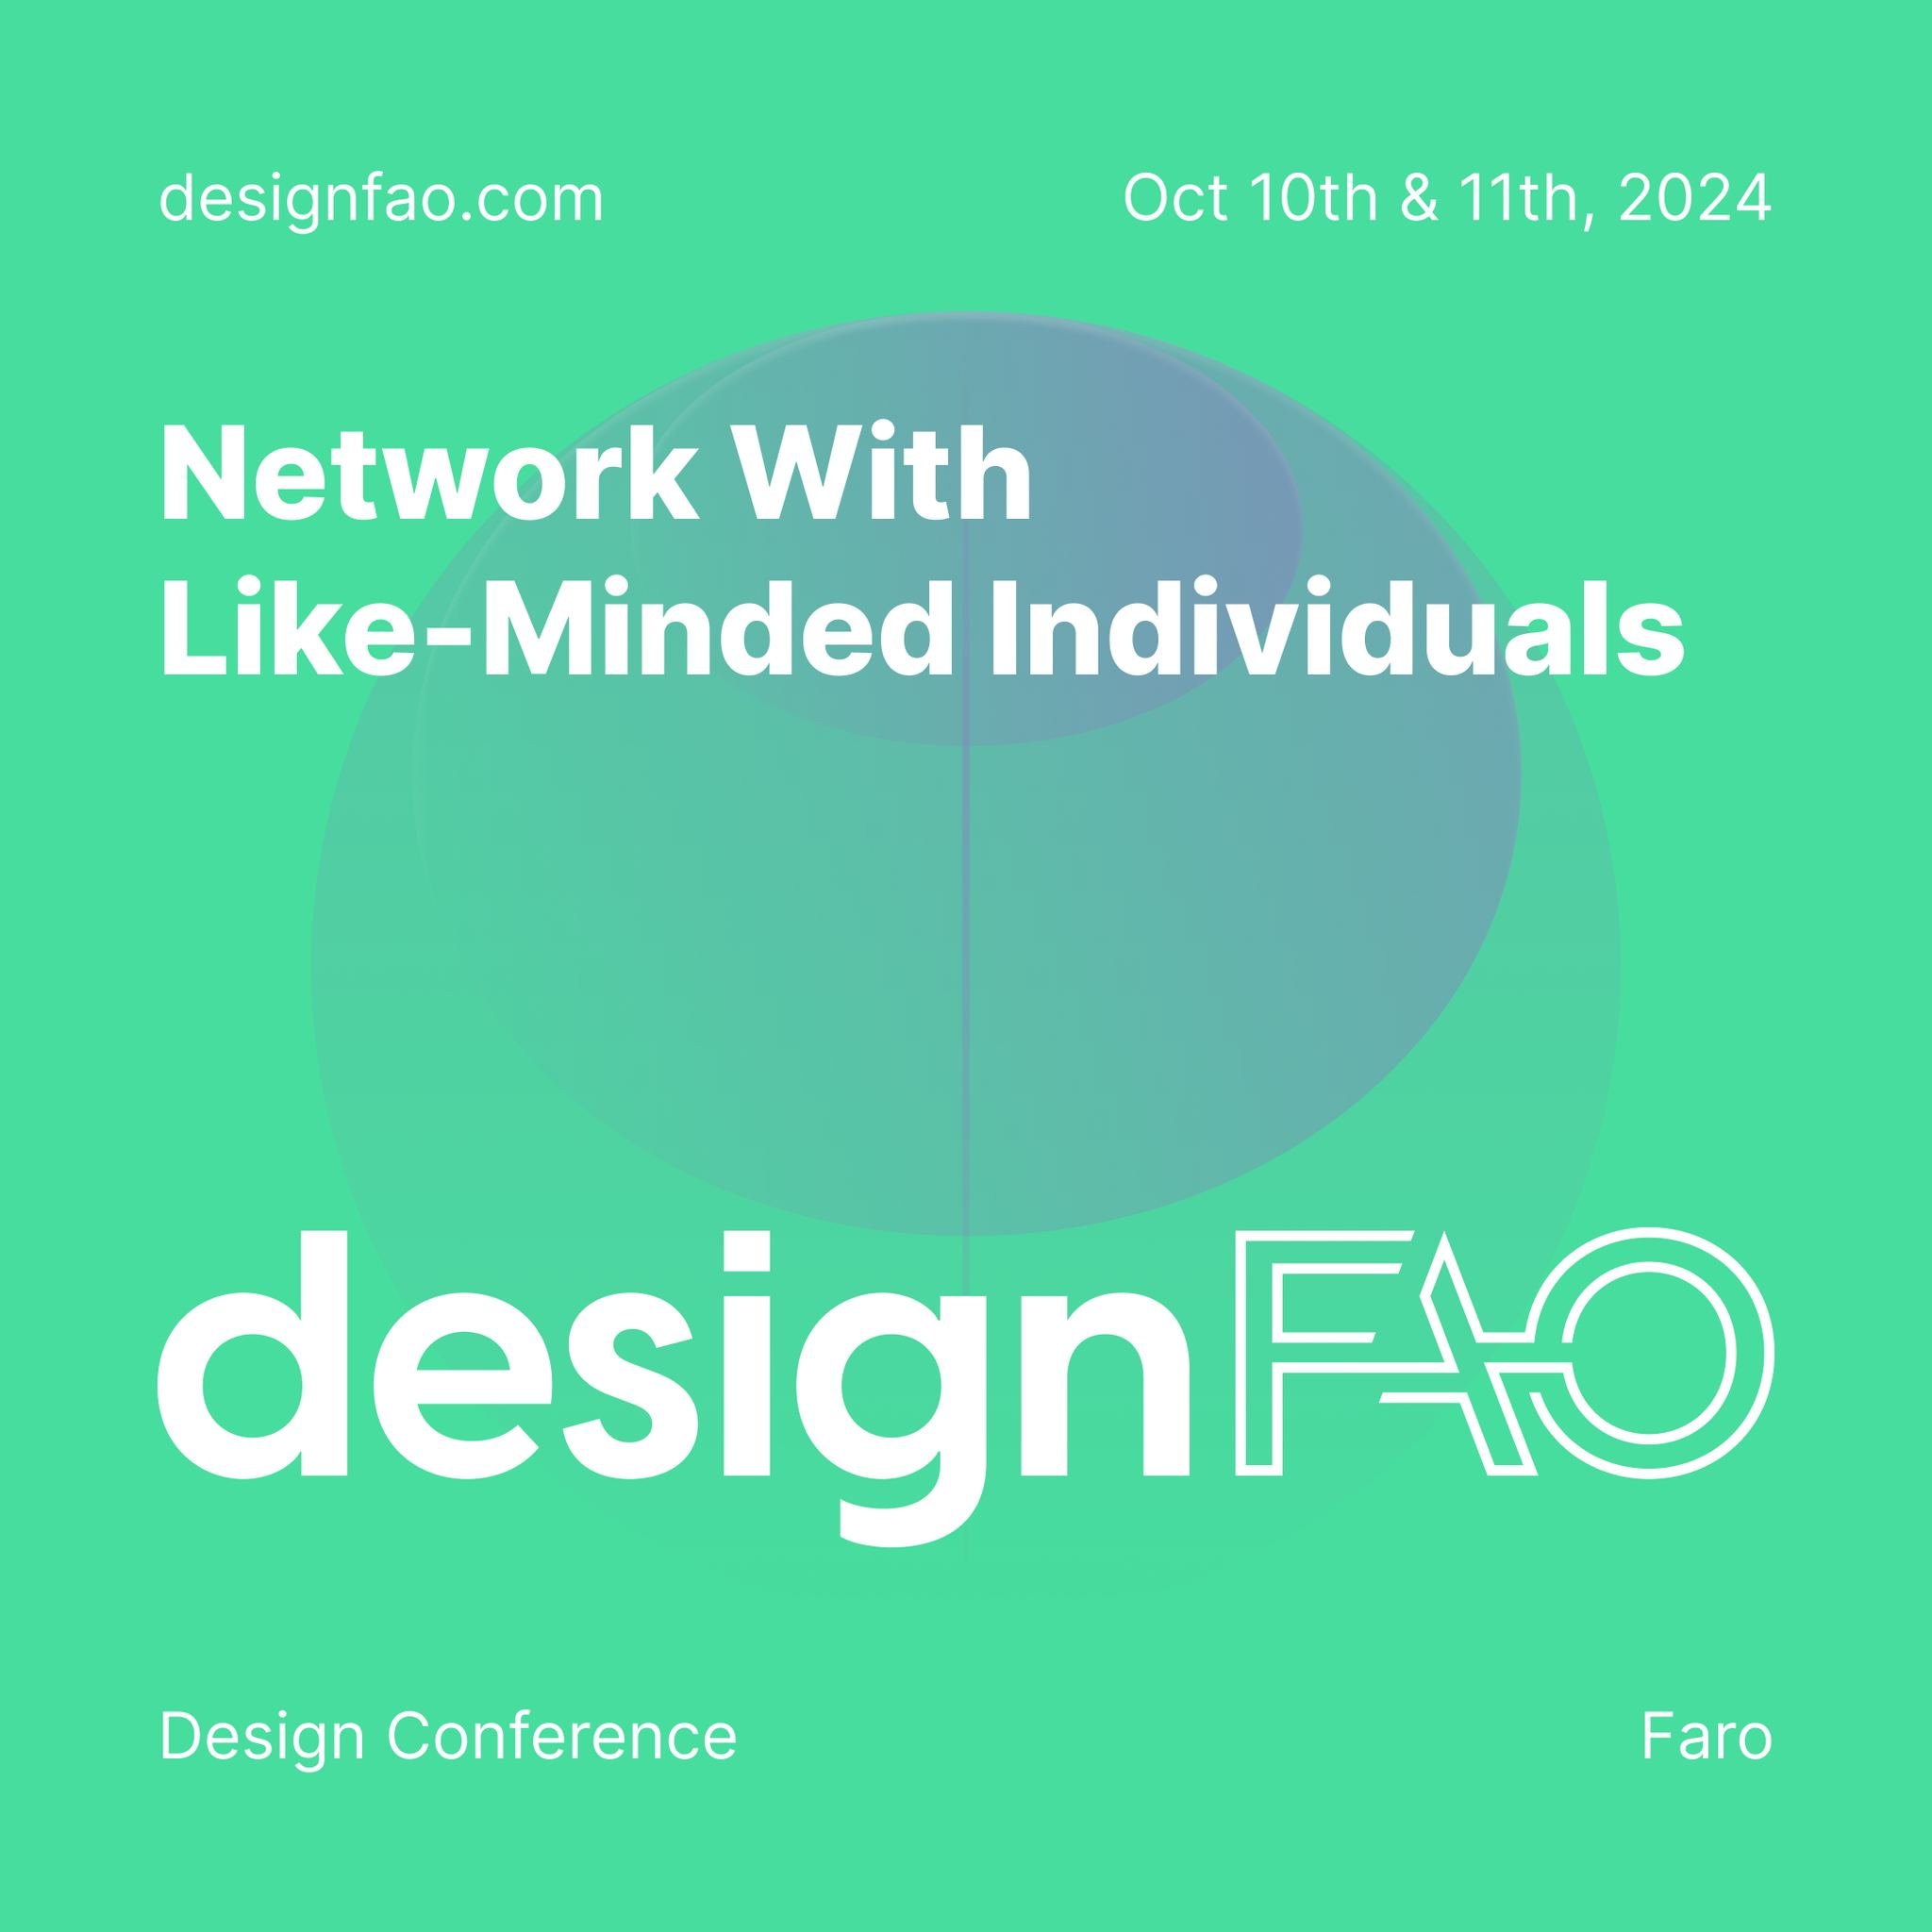 Network With Like-Minded Individuals
Build valuable connections and expand your professional circle.

Secure your tickets now and be at the forefront of creativity at designFAO 2024!

#designFAO24 #aidesign #designsystems #personalbrand #spatialdesig